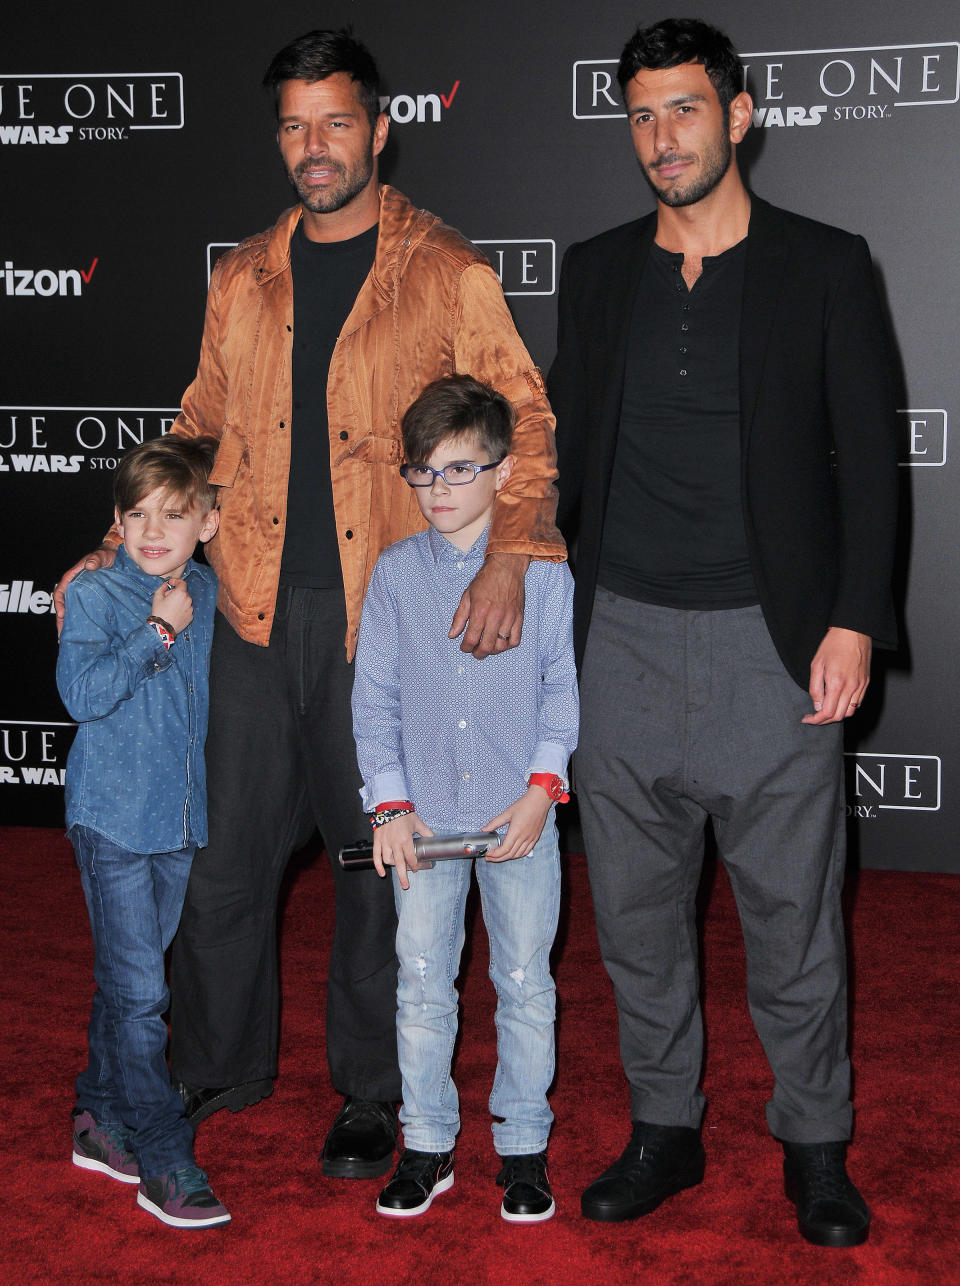 (L-R) Matteo Martin, Ricky Martin, Valentino Martin and Jwan Yosef arrives at the "Rogue One: A Star Wars Story" World Premiere held at the Pantages Theatre in Los Angeles, CA on Saturday, December 10, 2016. (Photo By Sthanlee B. Mirador) *** Please Use Credit from Credit Field ***